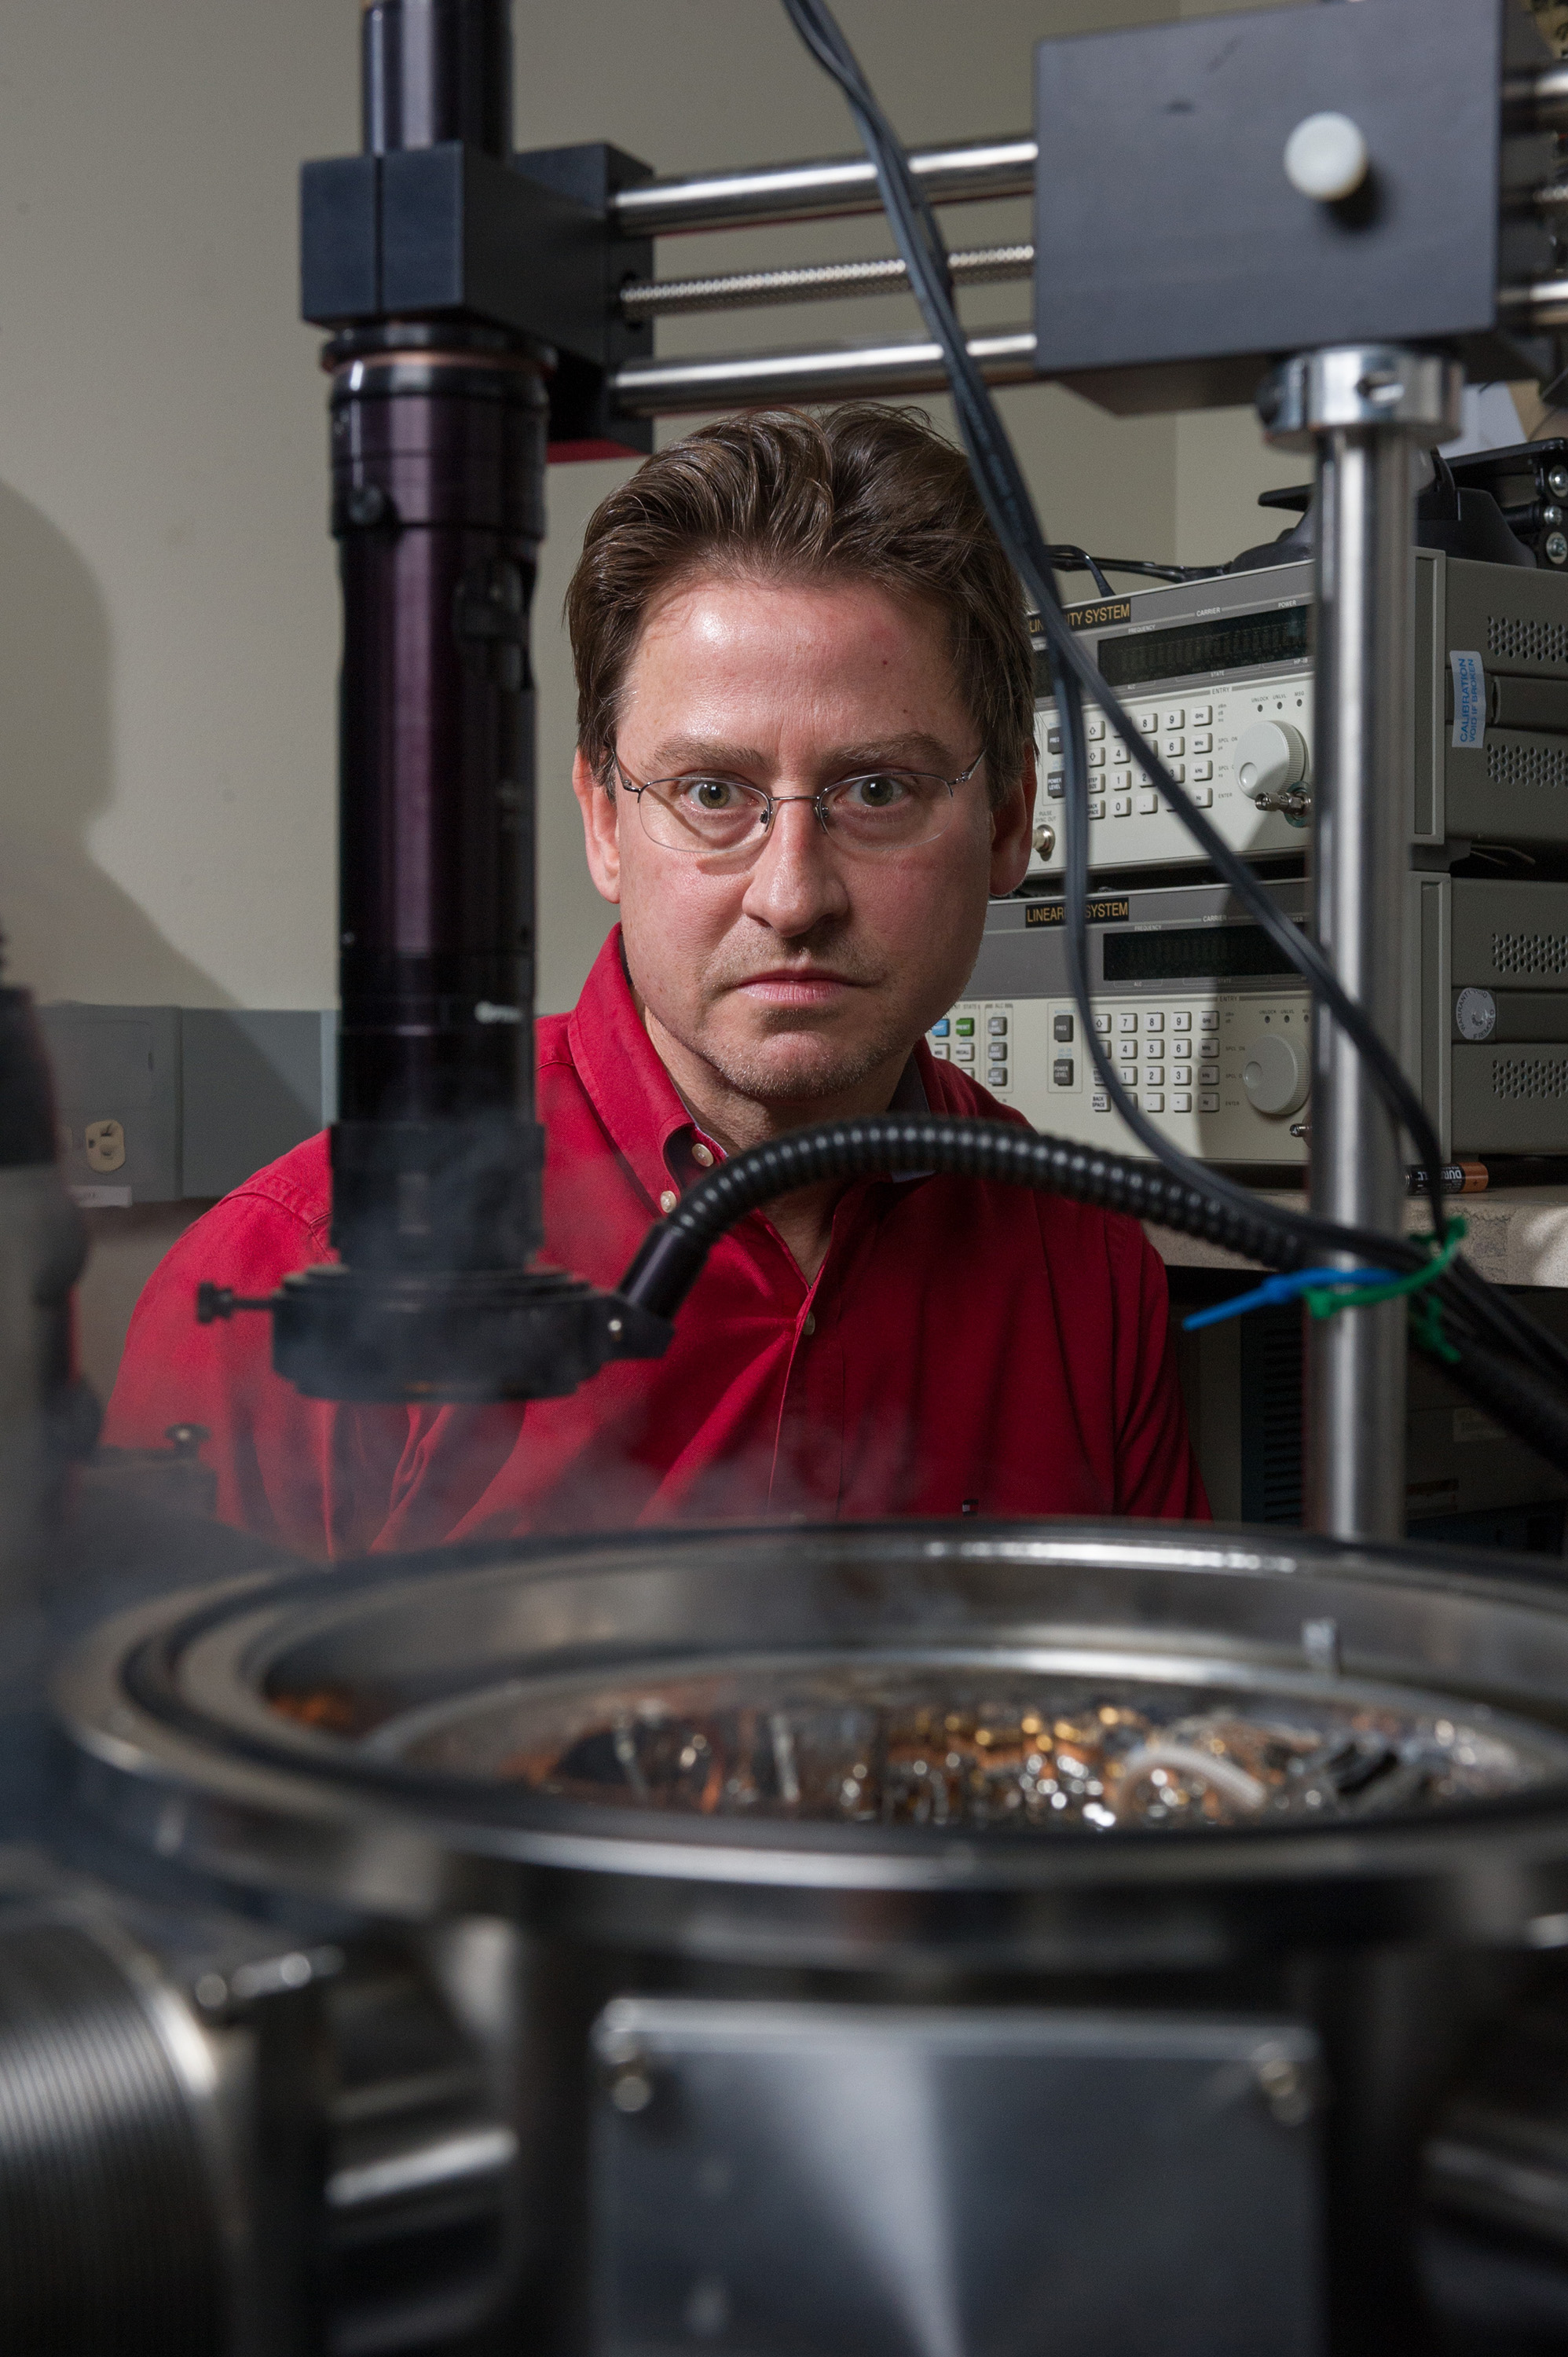 Professor John Cressler is pictured here with a cryogenic probe station in a Georgia Tech laboratory. A cloud produced by boiling liquid nitrogen can be seen in the foreground. (Georgia Tech Photo: Rob Felt)